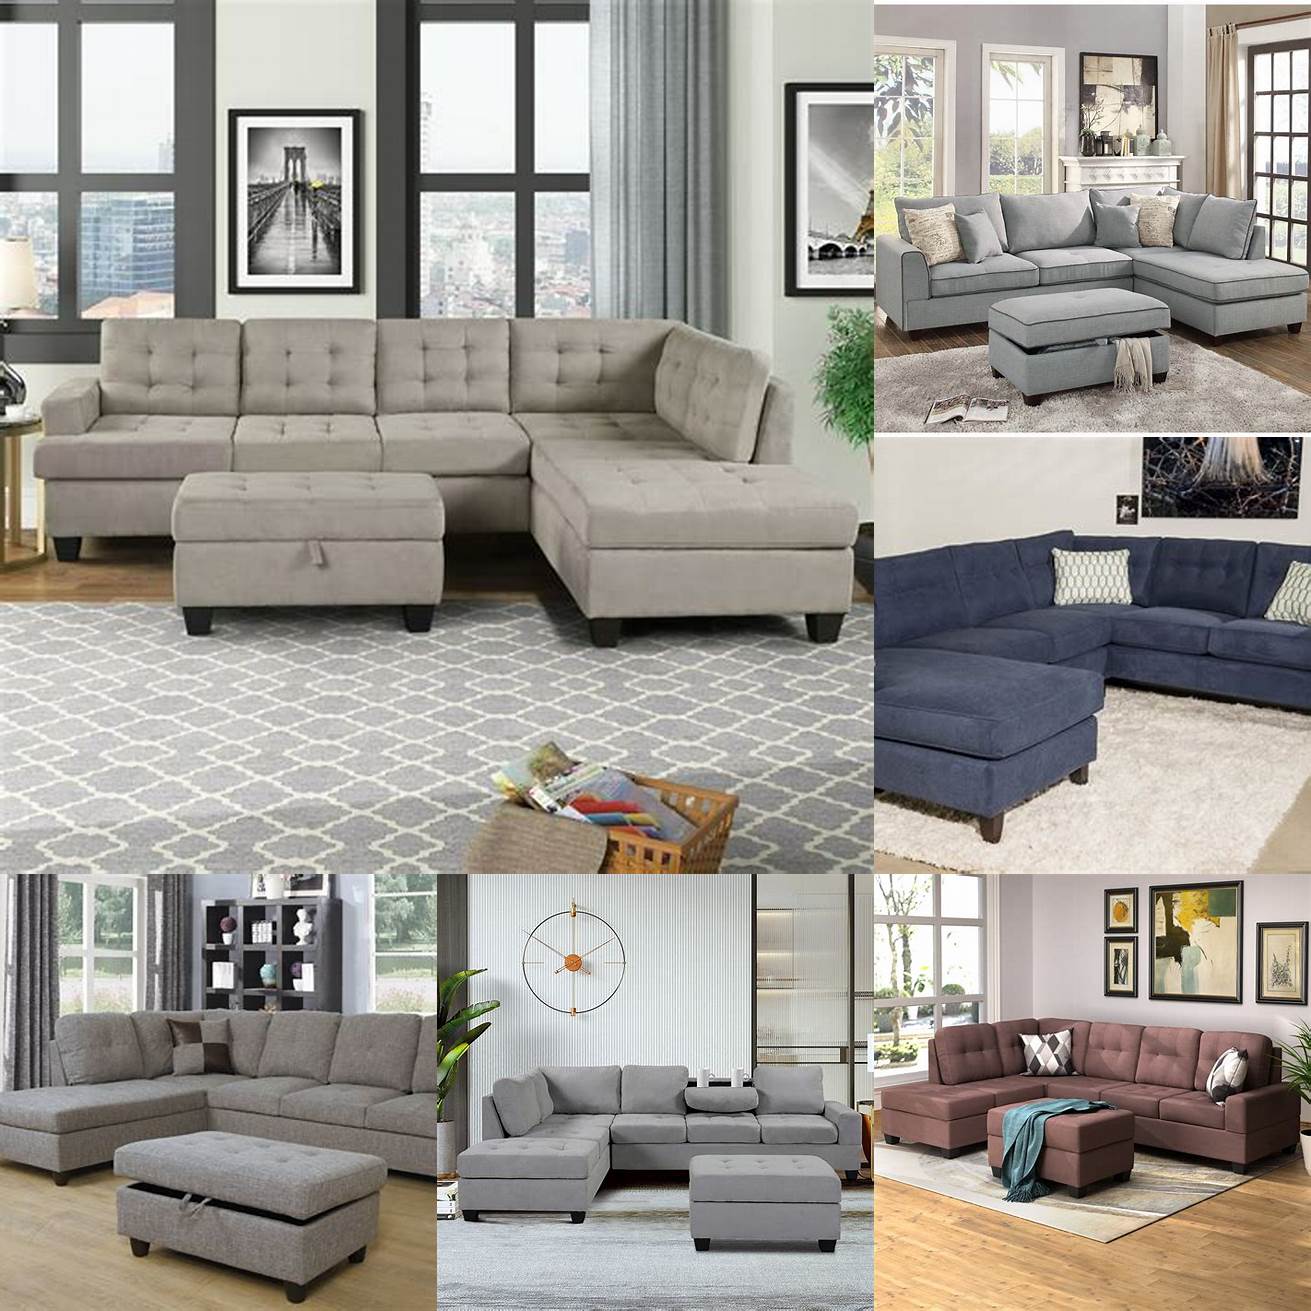 A 3 piece sectional sofa with storage allows you to keep your living room clutter-free